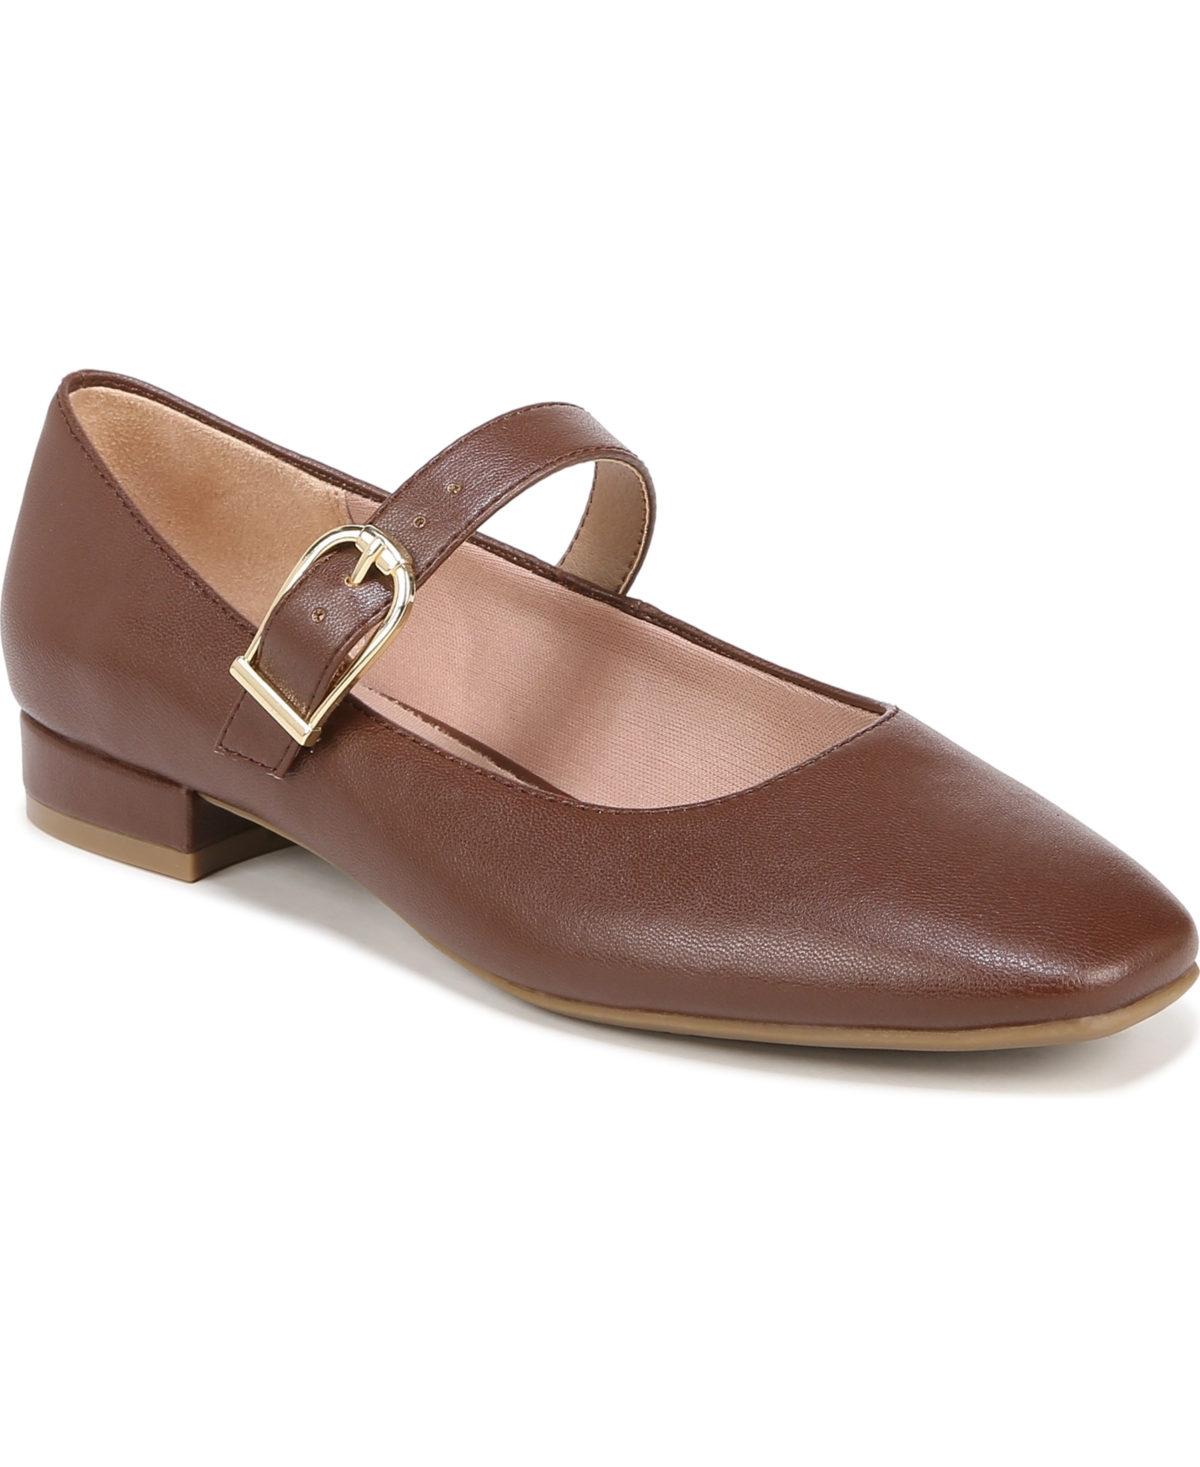 Shop Lifestride Women's Cameo Mary Jane Ballet Flats In Dark Tan Faux Leather